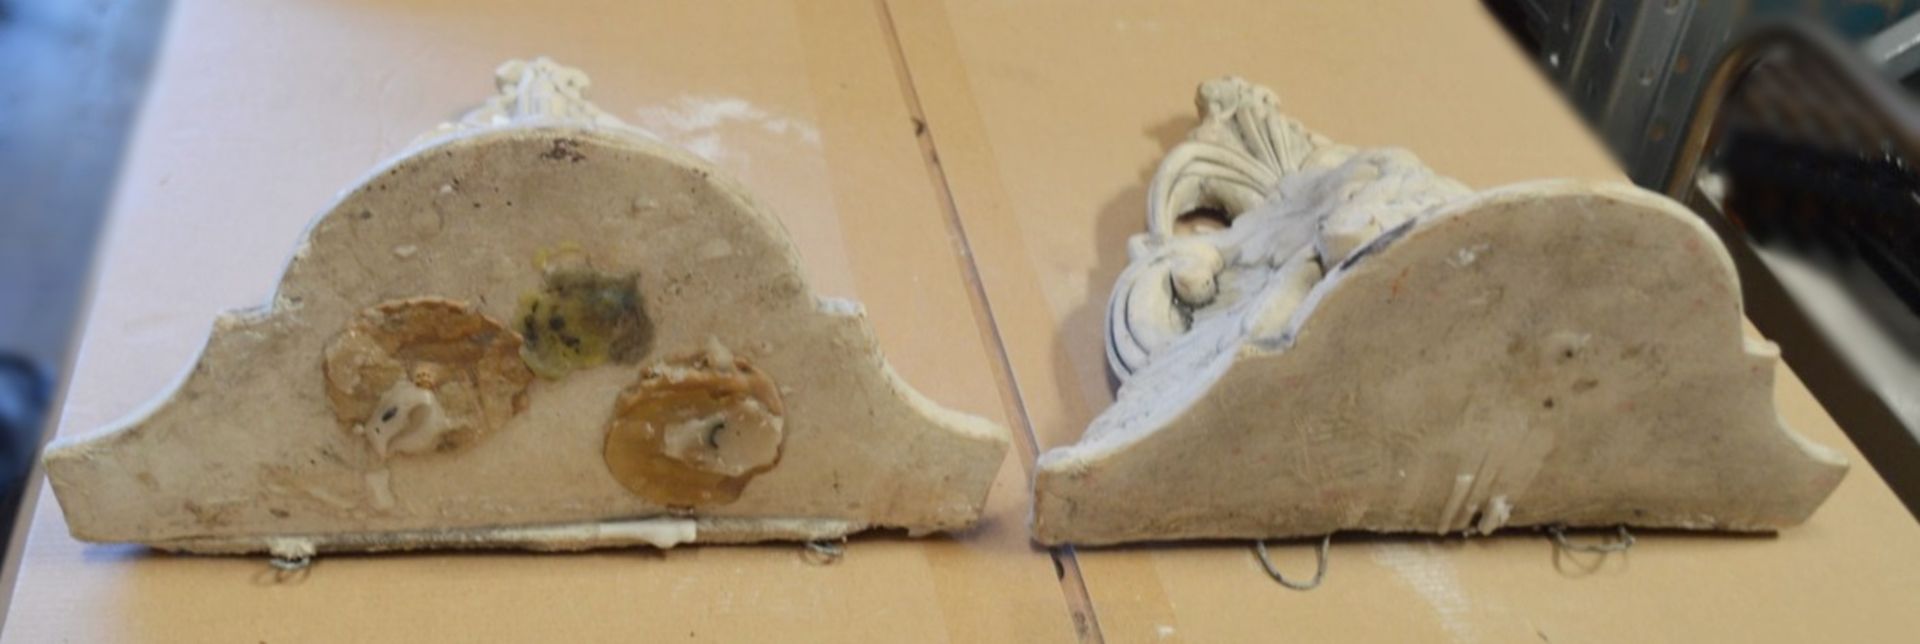 A Pair Of Ornamental Plaster Gargoyles / Garden Plaques - Dimensions: W30 x H32 x D16cm - Used, In - Image 4 of 5